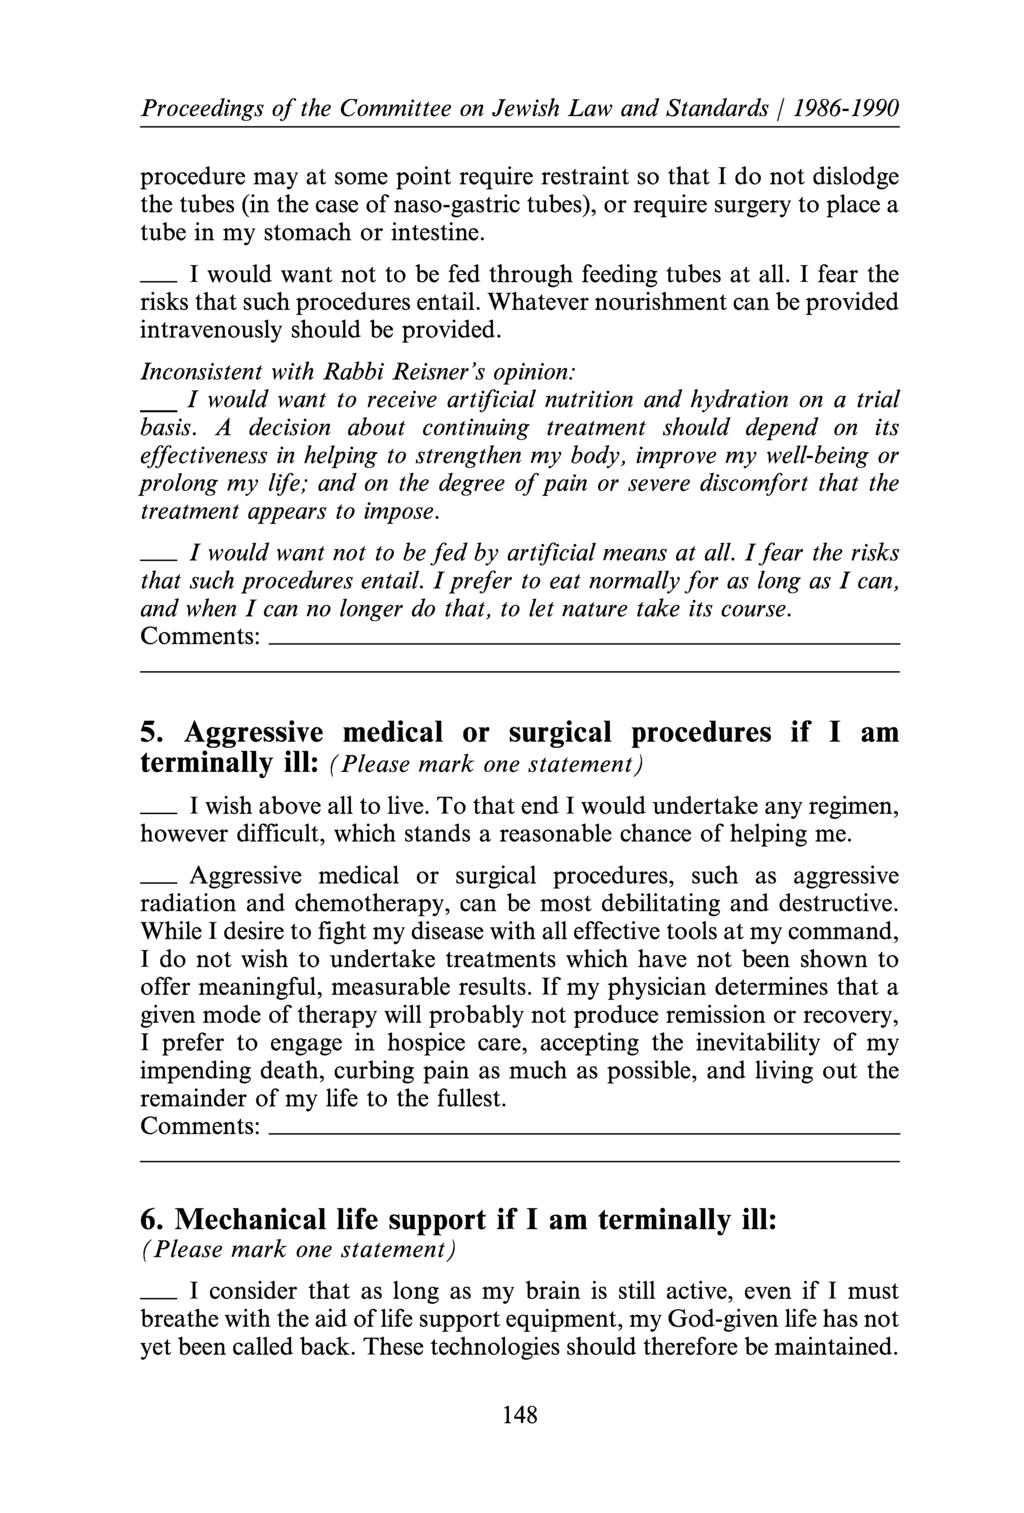 Proceedings of the Committee on Jewish Law and Standards/ 1986-1990 procedure may at some point require restraint so that I do not dislodge the tubes (in the case of naso-gastric tubes), or require